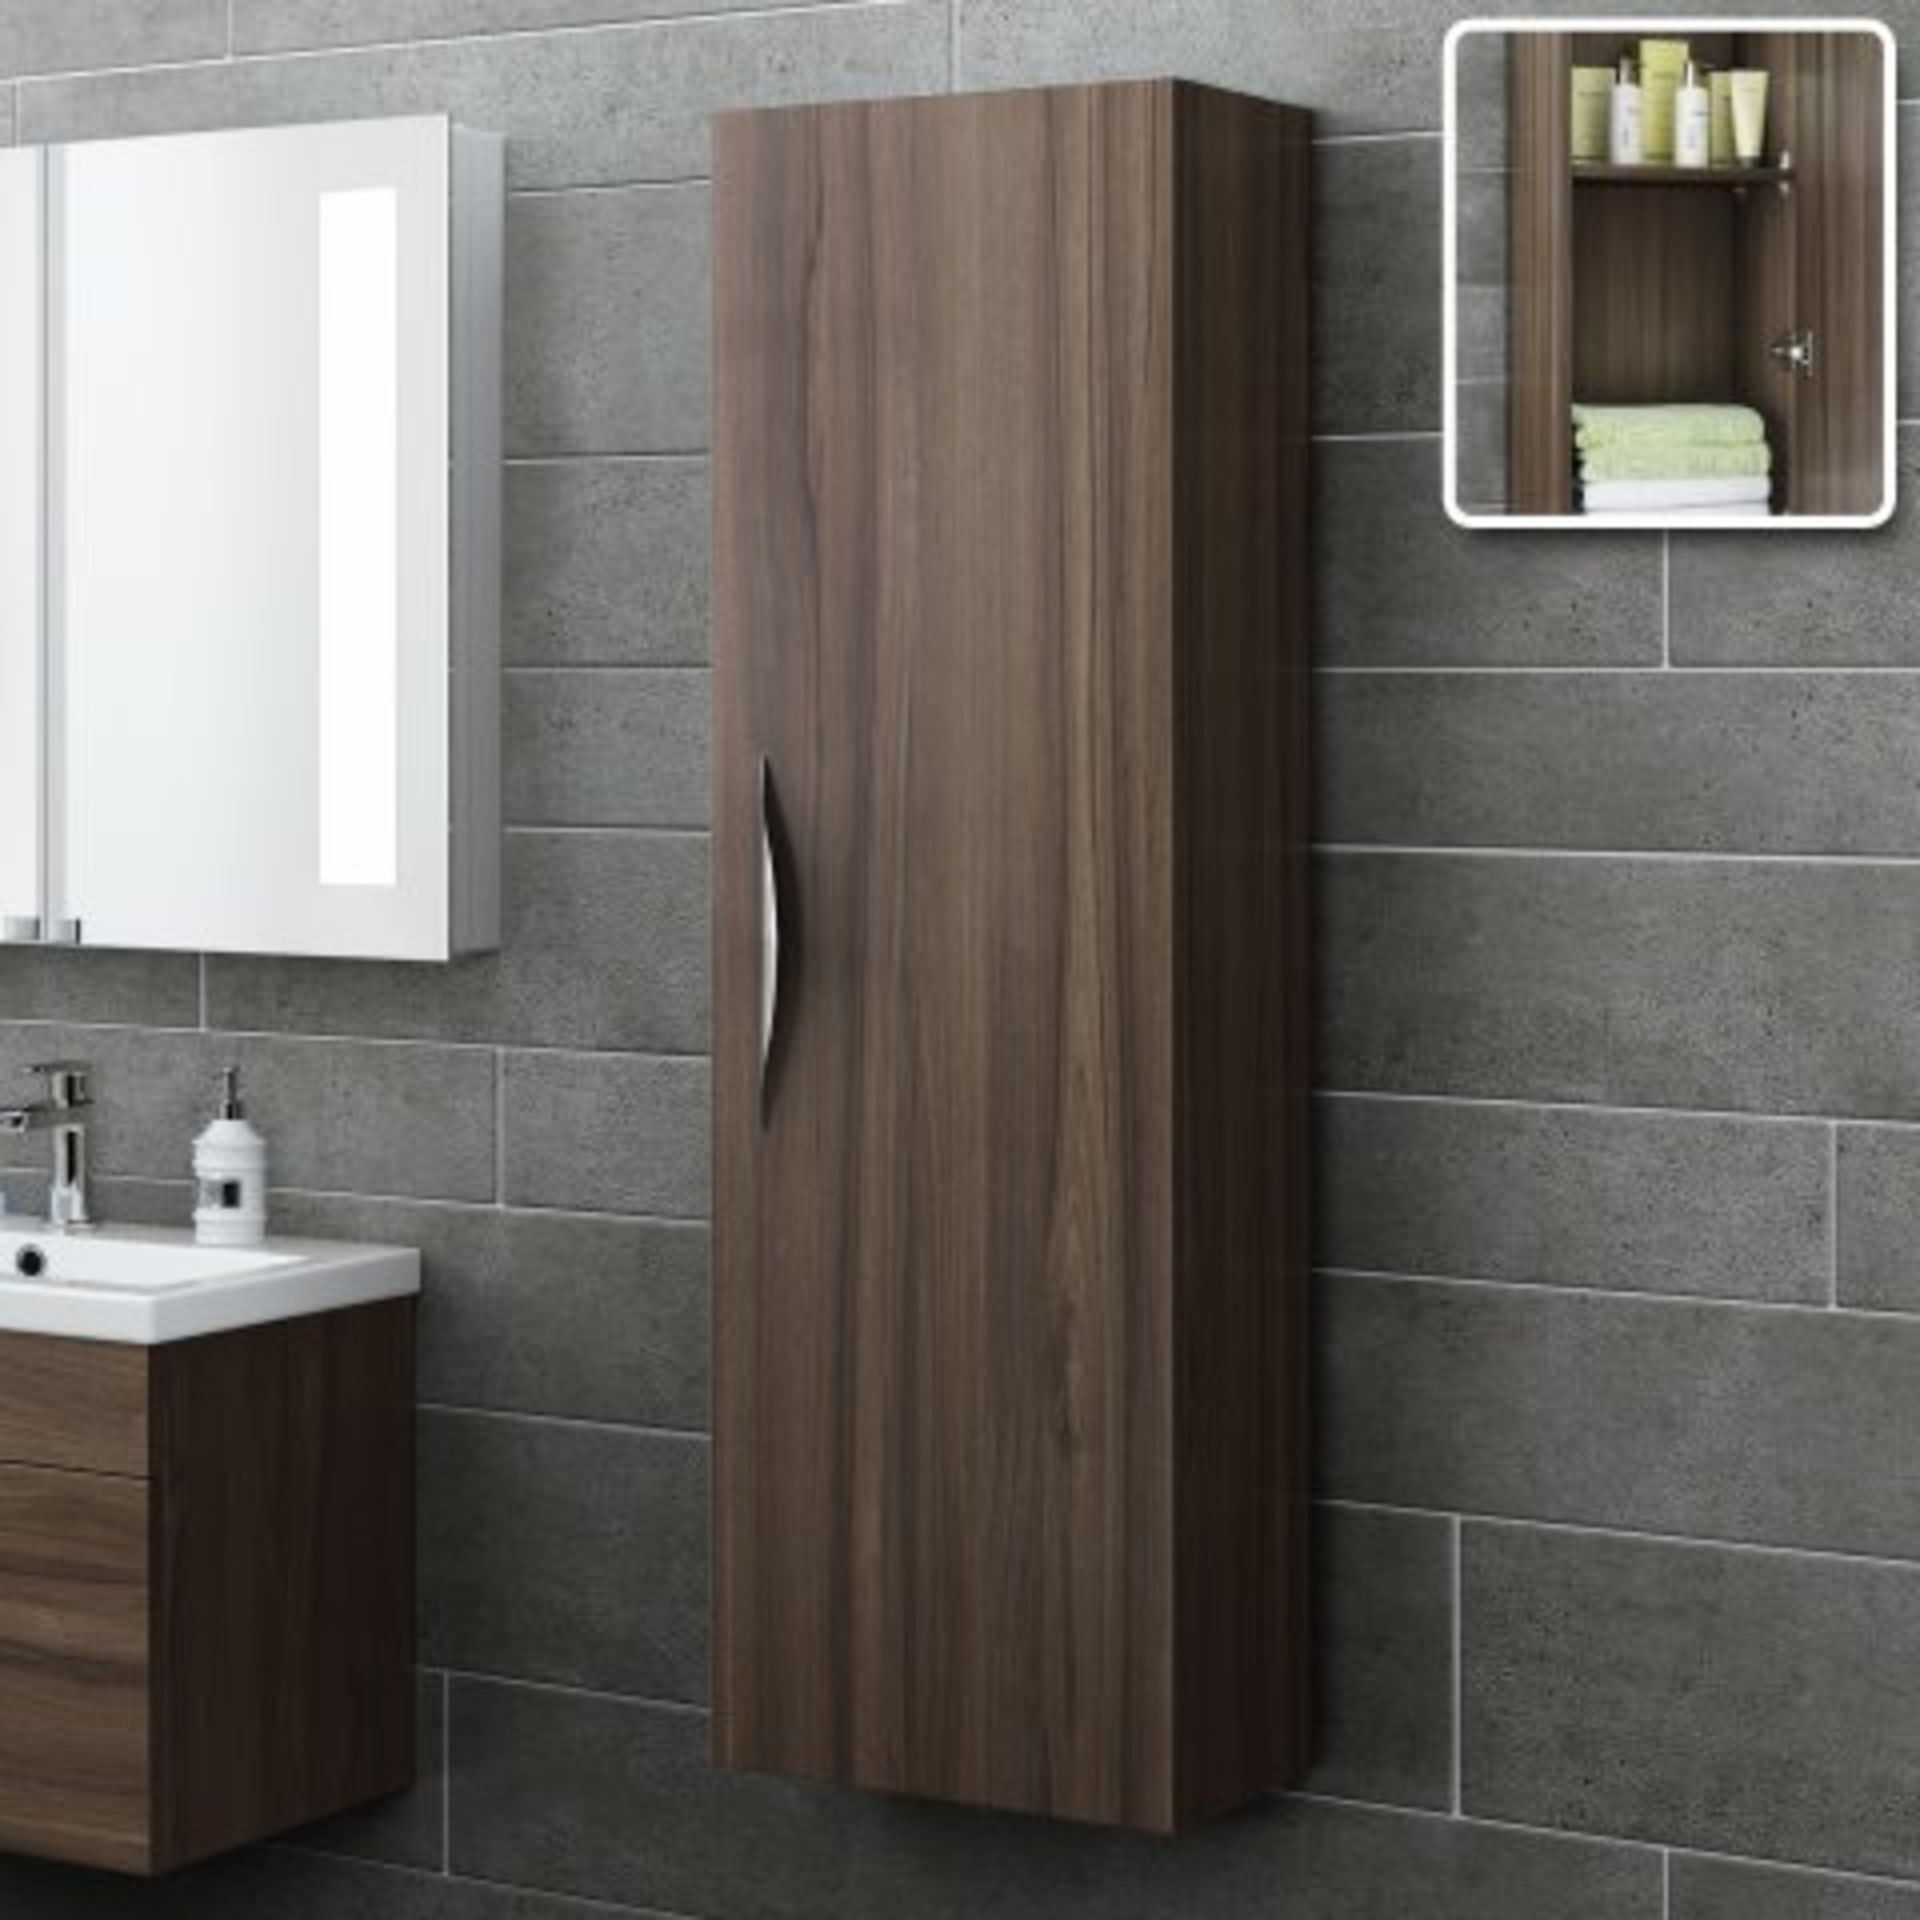 N55 - 1200mm Severn Walnut Effect Tall Storage Cabinet - Wall Hung. RRP £299.99. Another stunning